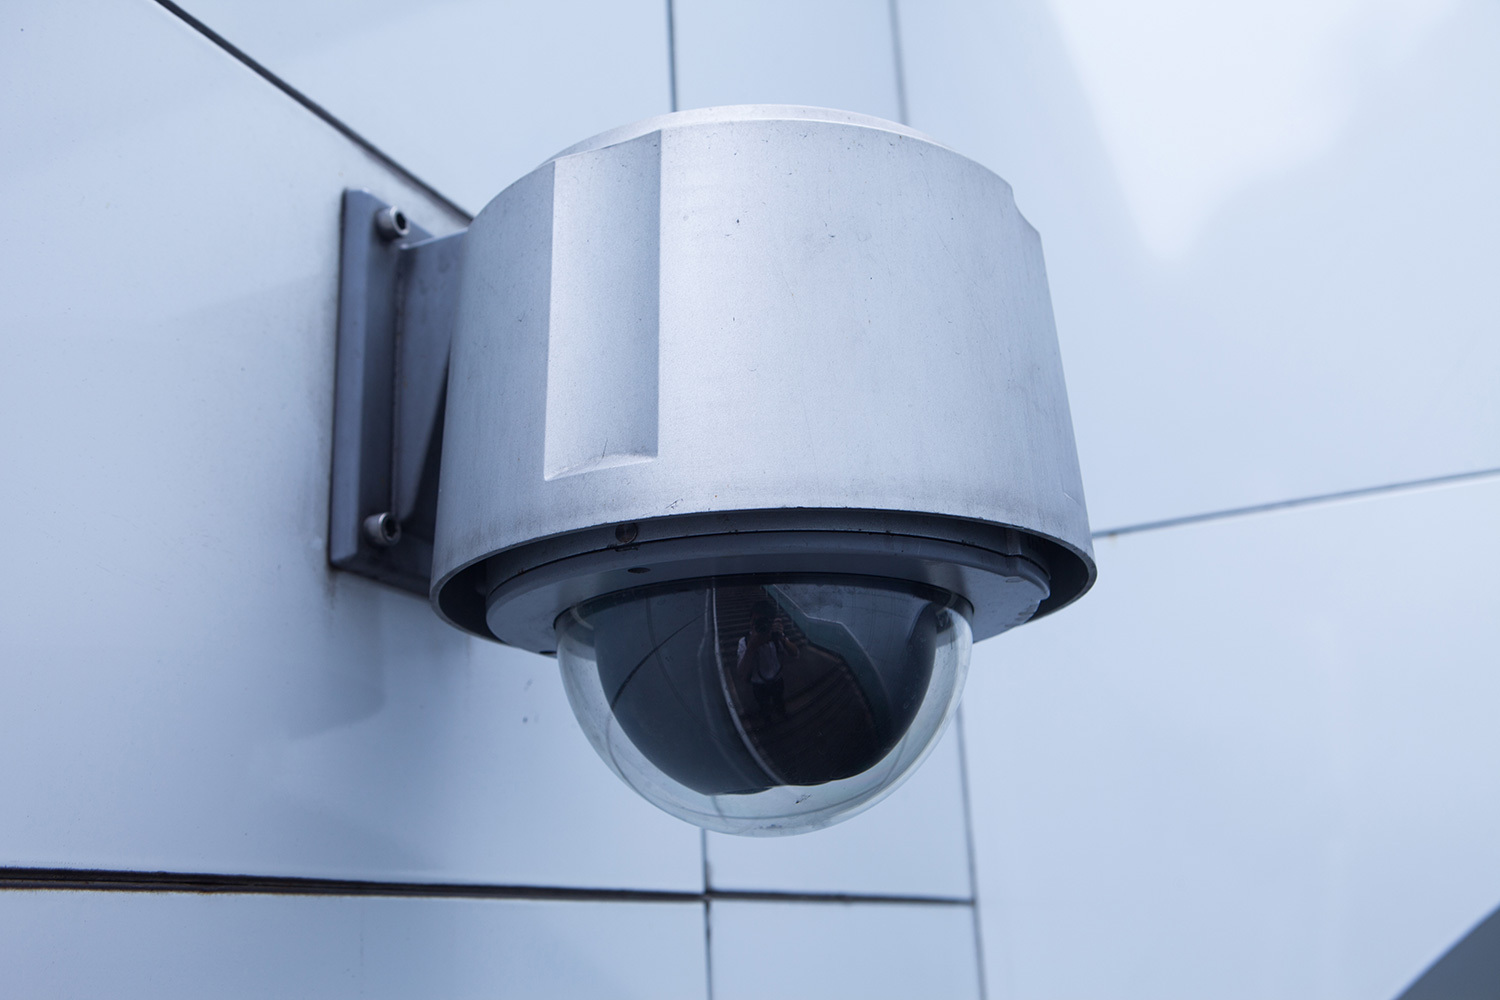 <span style="font-weight: bold;">Day/Night Security Dome Camera</span><br>